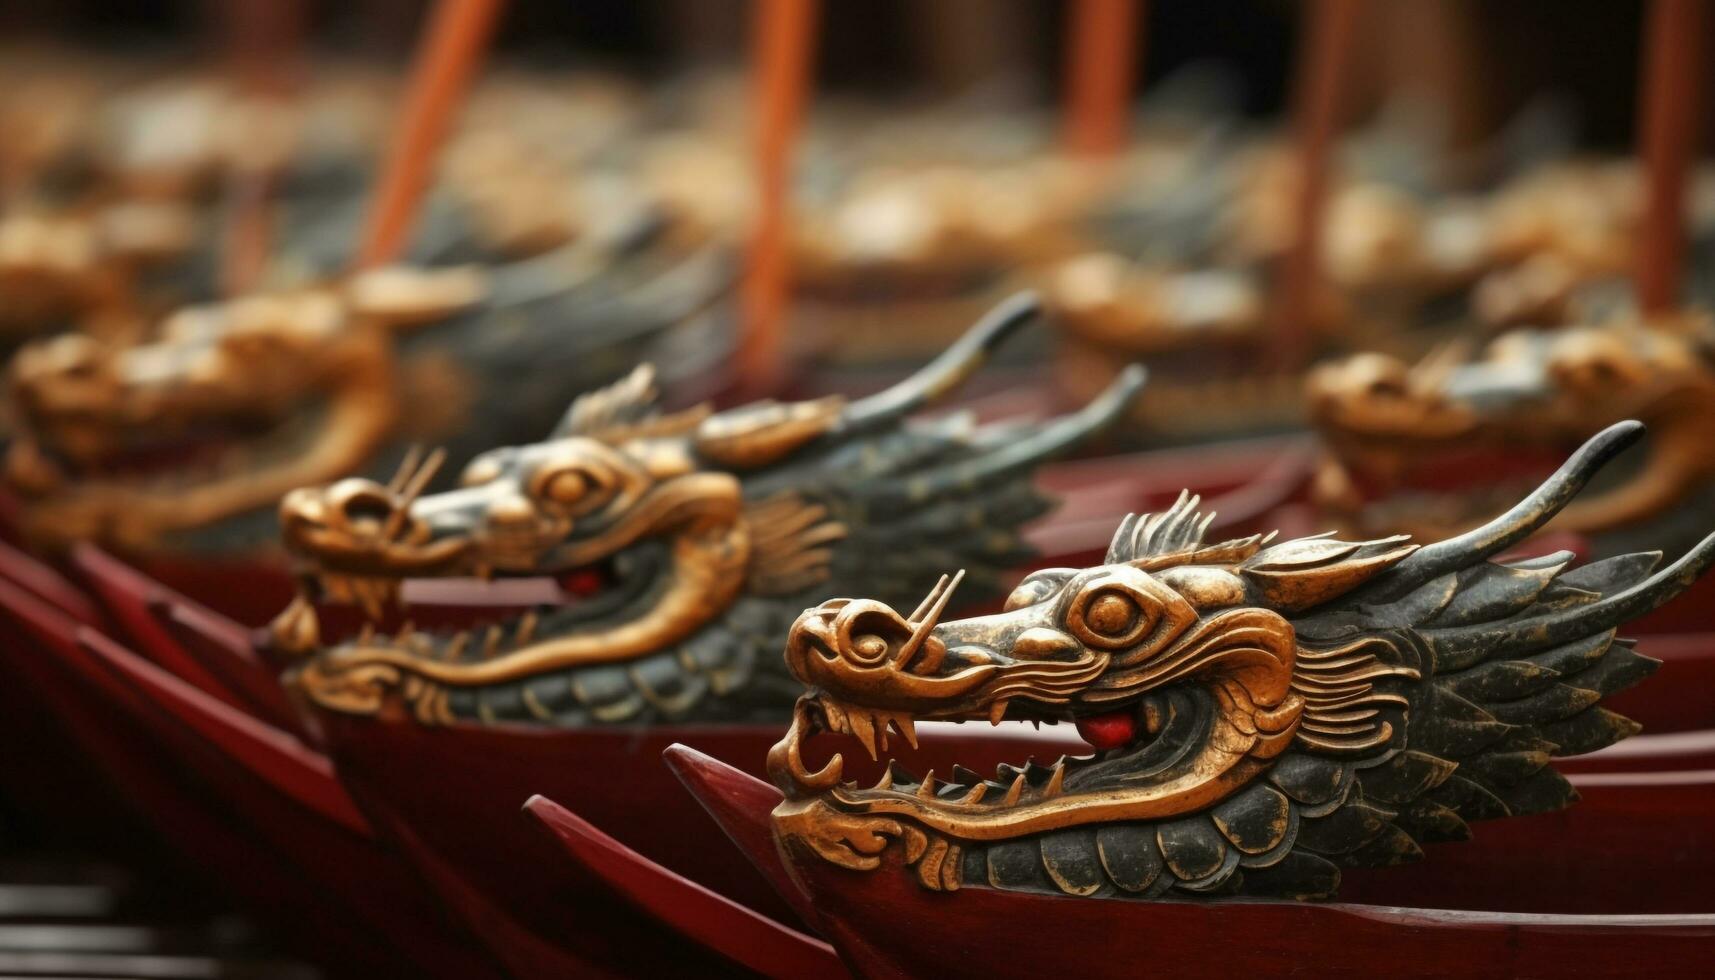 Dragon statue symbolizes spirituality in ancient Chinese culture and religion generated by AI photo